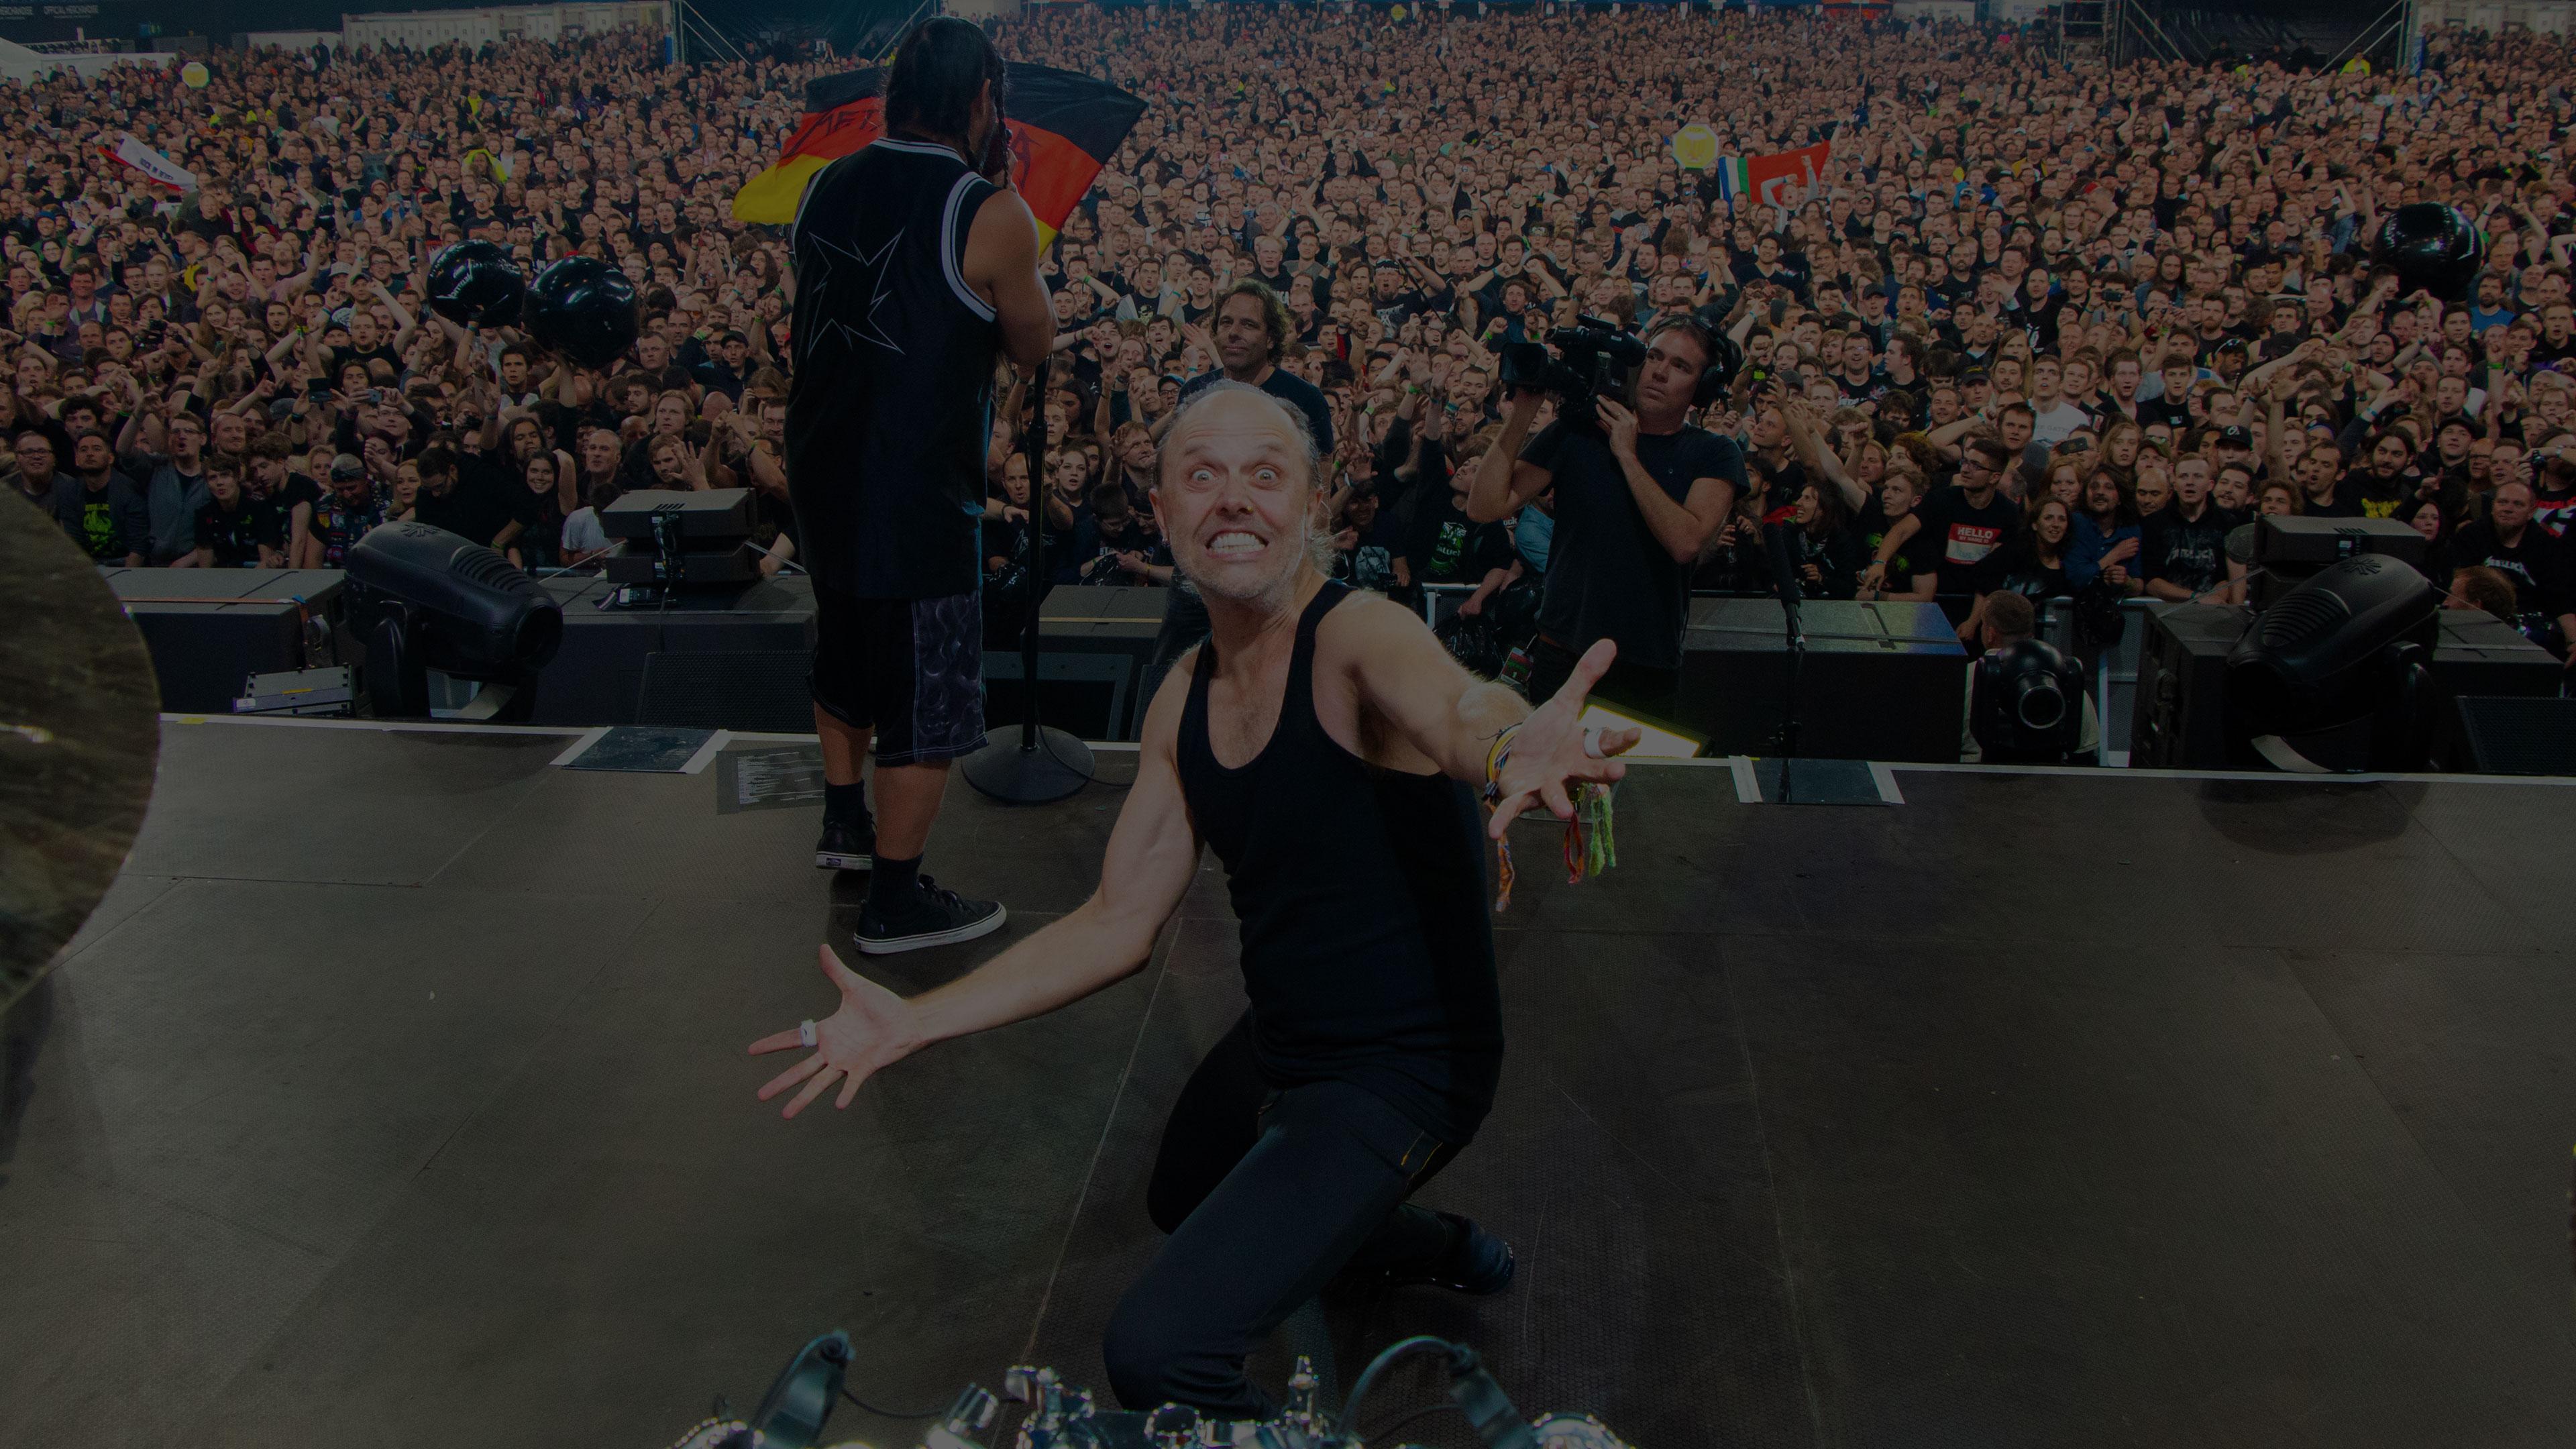 Metallica at Rock im Revier at Veltins-Arena in Gelsenkirchen, Germany on May 29, 2015